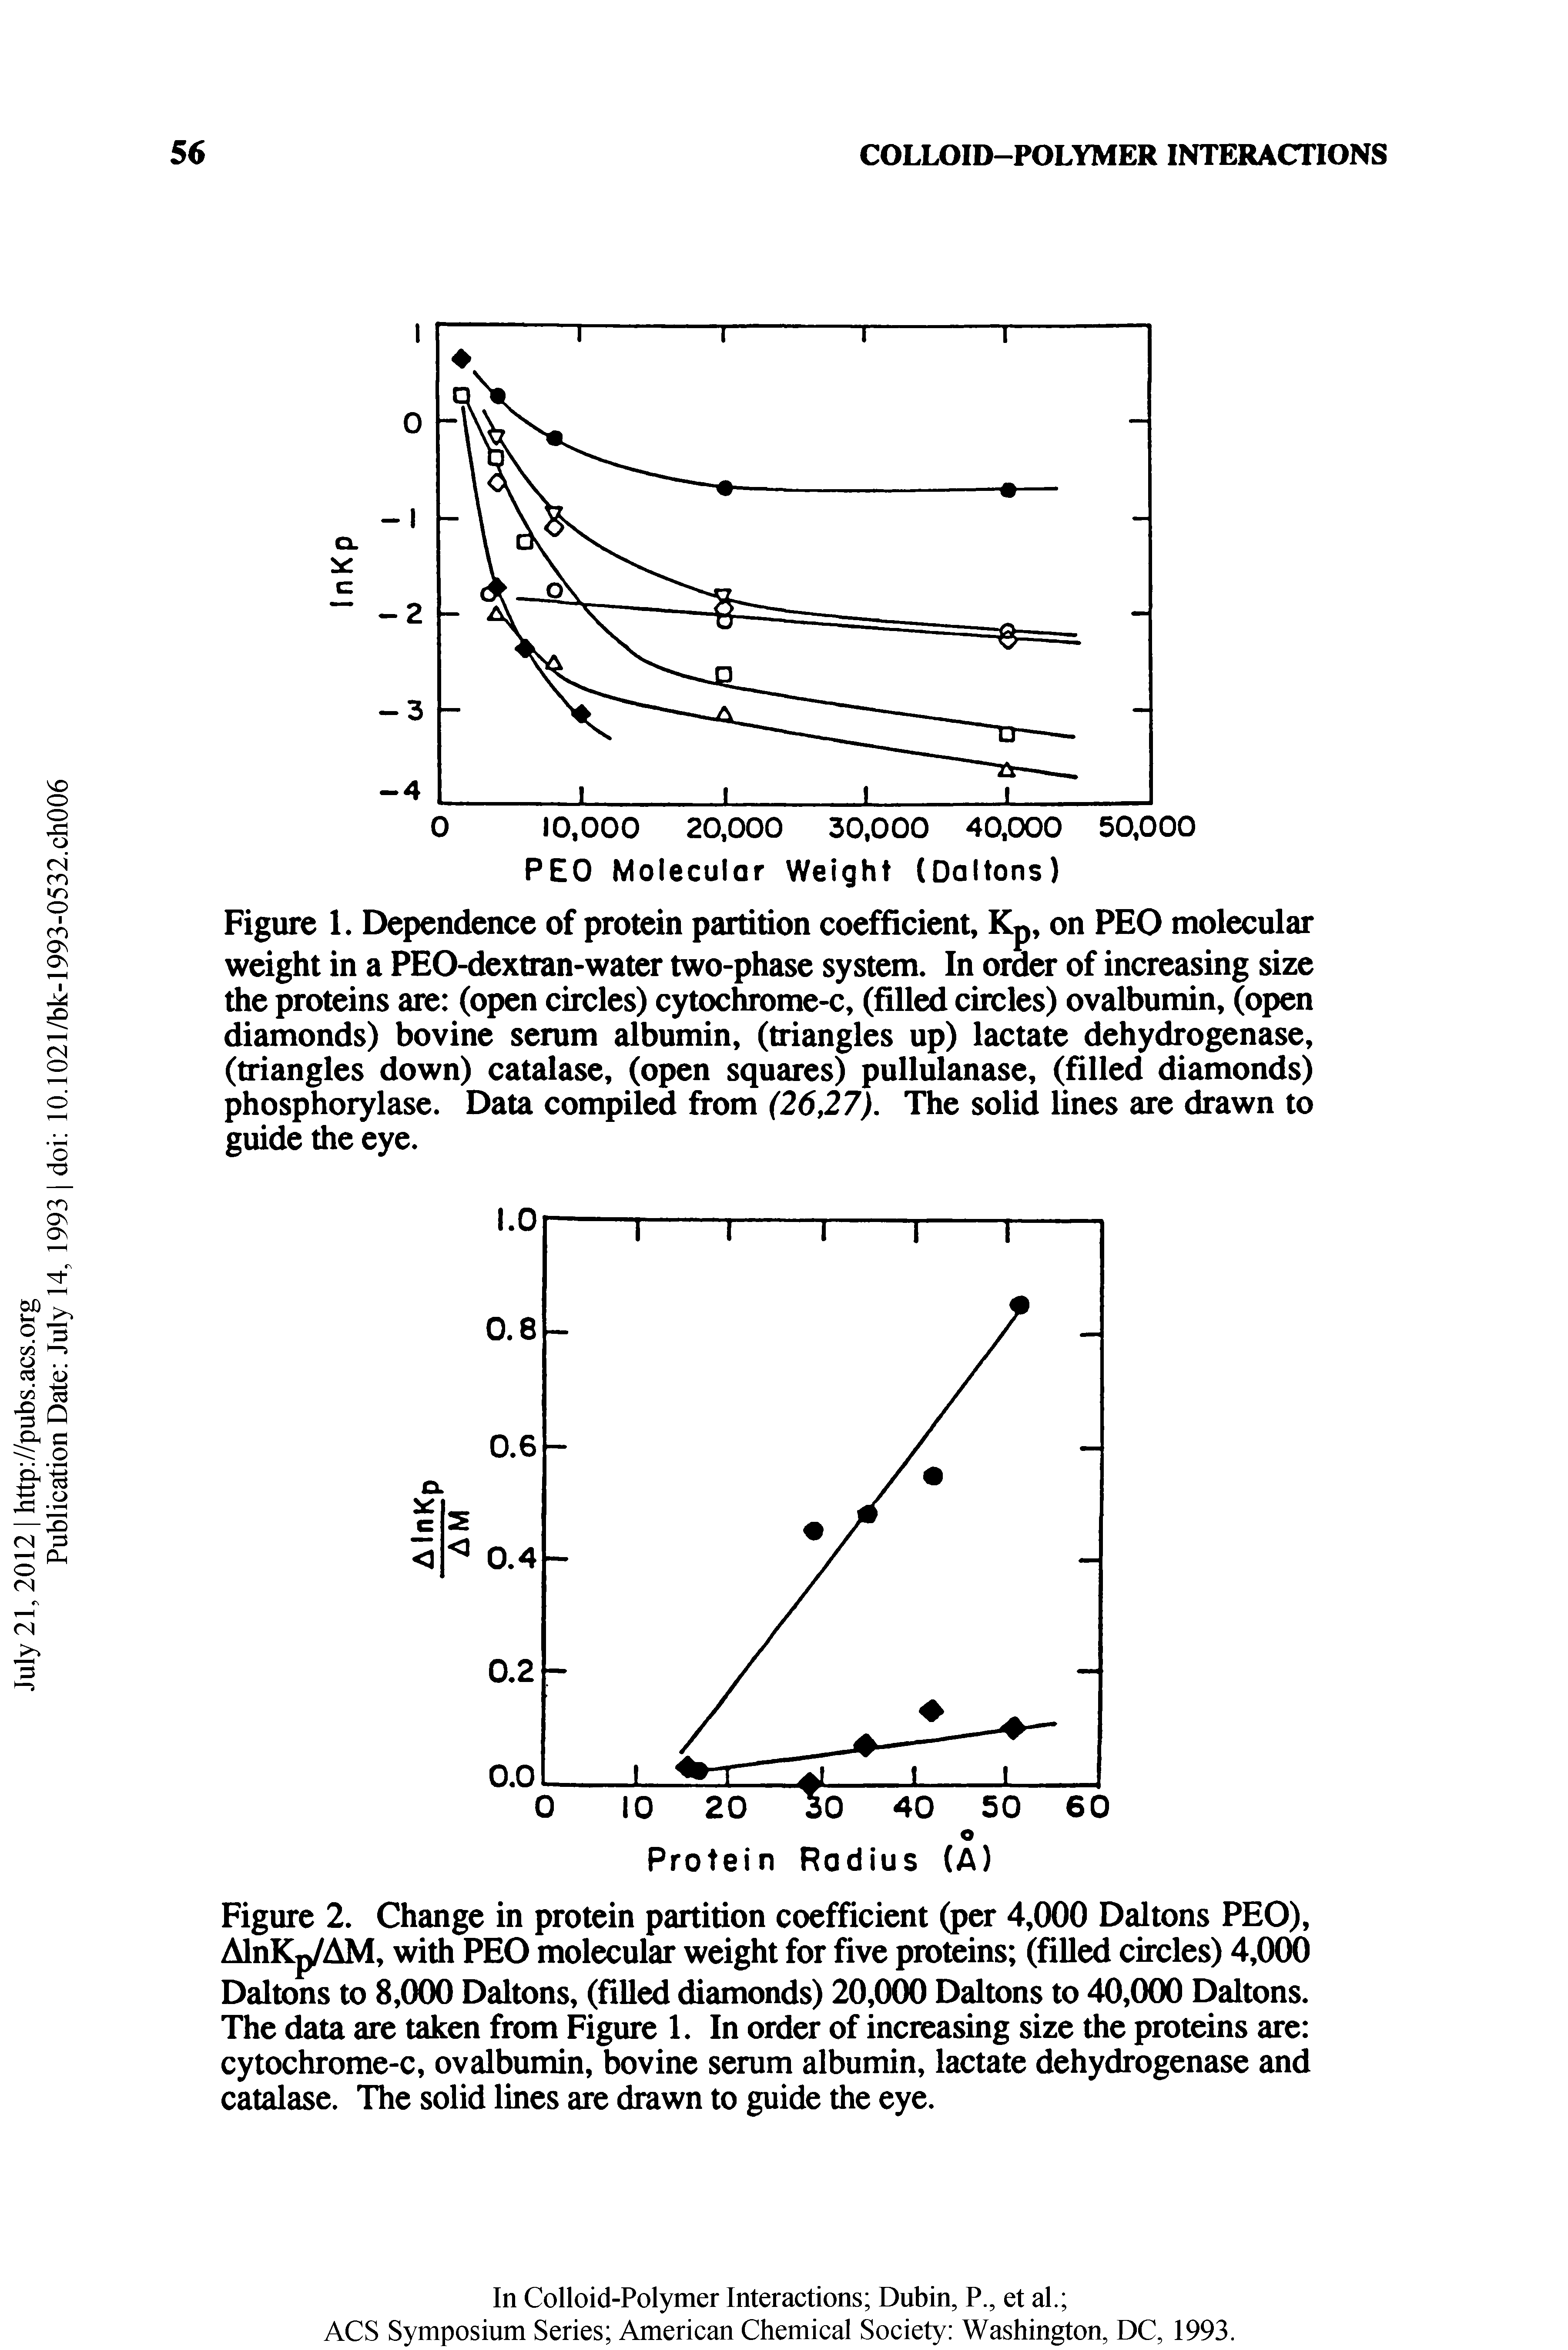 Figure 1. Dependence of protein partition coefficient, Kp, on PEO molecular weight in a PEO-dextran-water two-phase system. In order of increasing size the proteins are (open circles) cytochrome-c, (filled circles) ovalbumin, (open diamonds) bovine serum albumin, (triangles up) lactate dehydrogenase, (triangles down) catalase, (open squares) pullulanase, (filled diamonds) phosphorylase. Data compiled from (26,27). The solid lines are drawn to guide the eye.